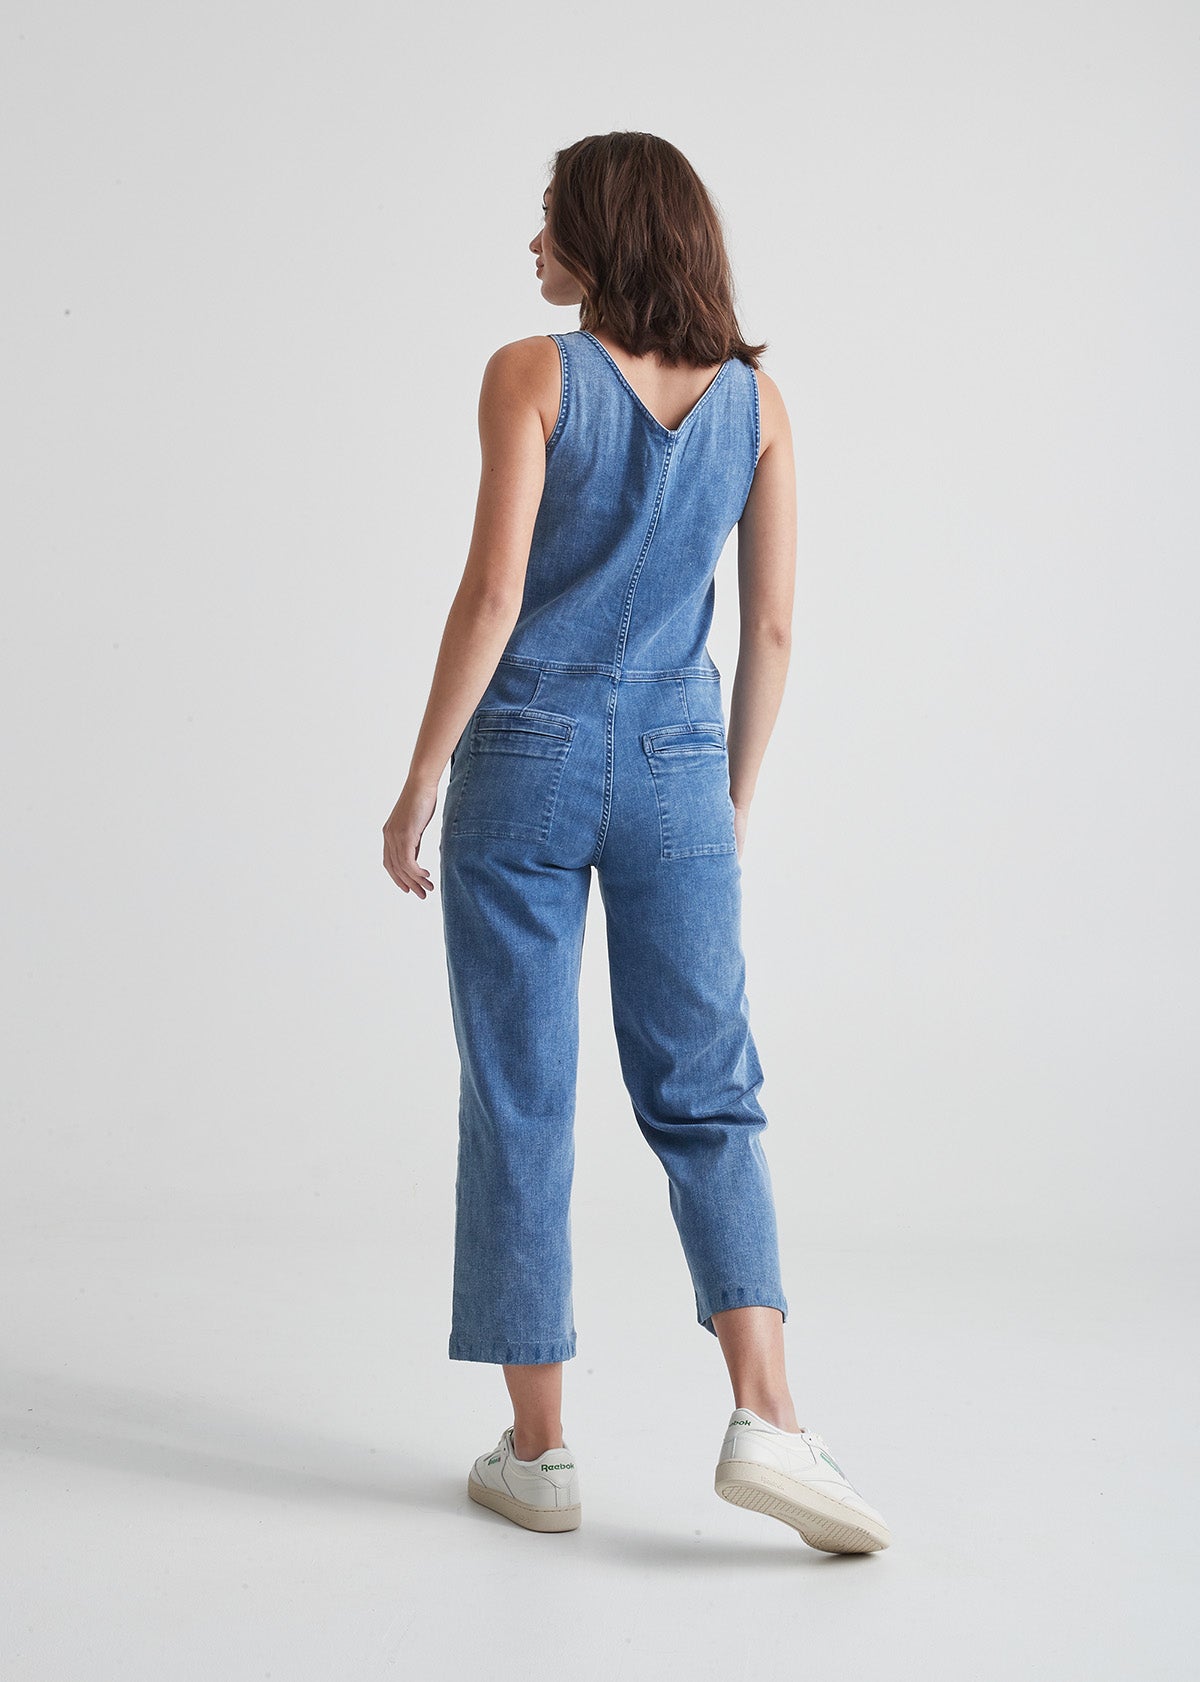 Jeans Stretch Overalls Sexy Women Turn Down Collar Elegant Blue